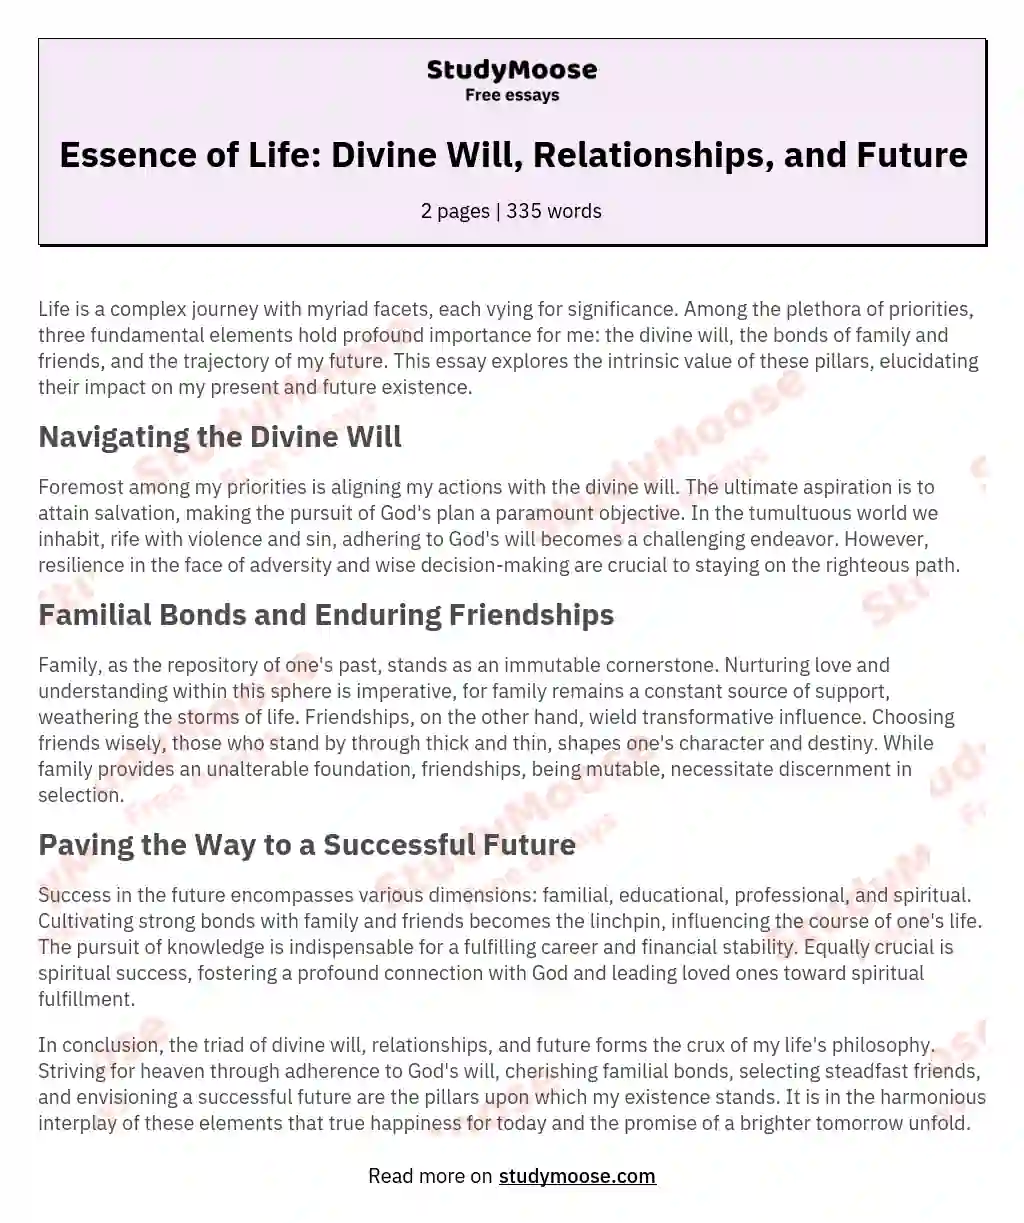 Essence of Life: Divine Will, Relationships, and Future essay